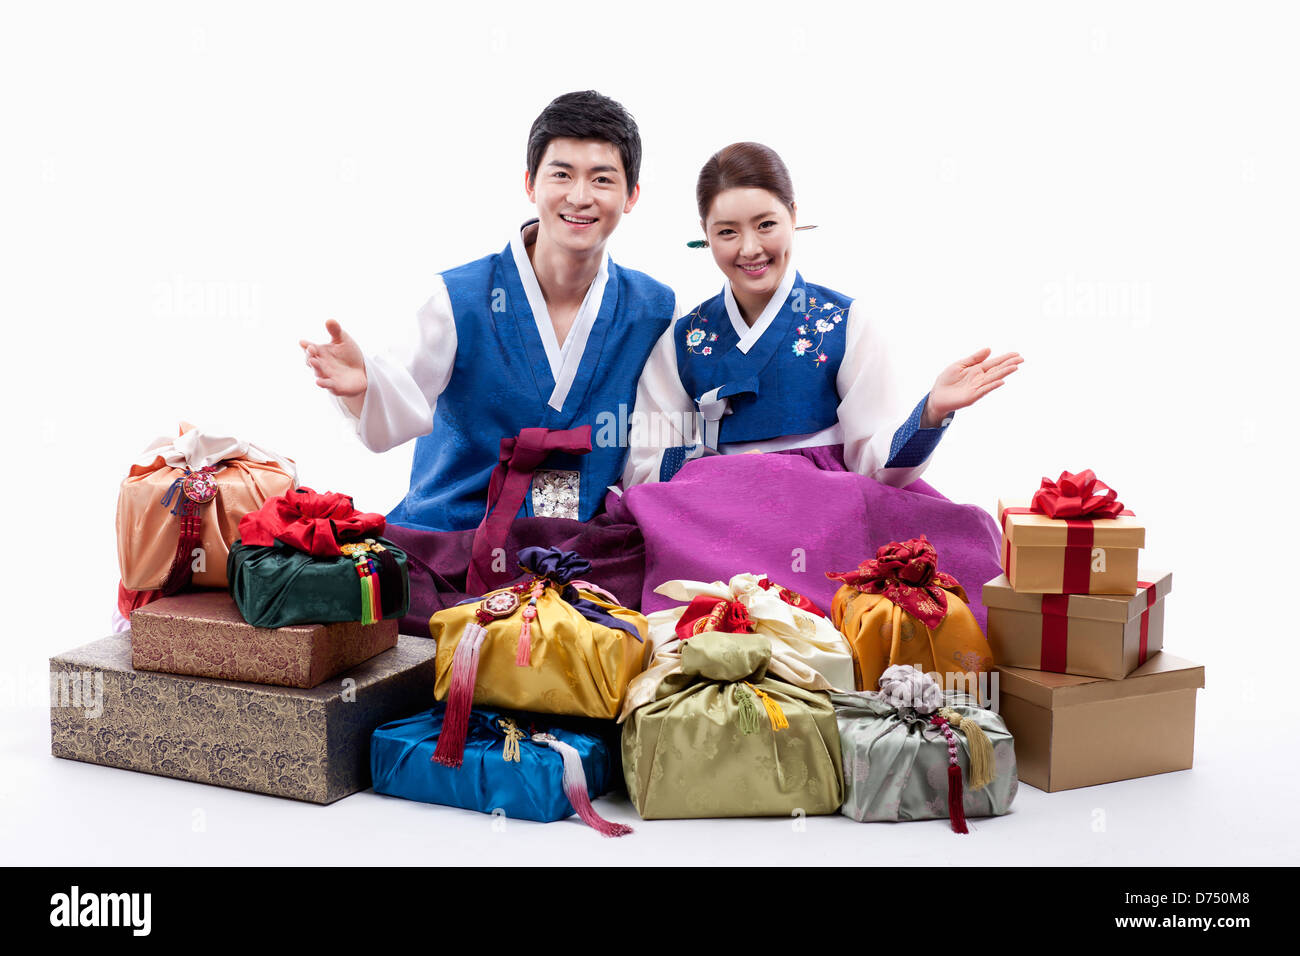 a man and a woman in Korean tradition costume behind gifts Stock Photo